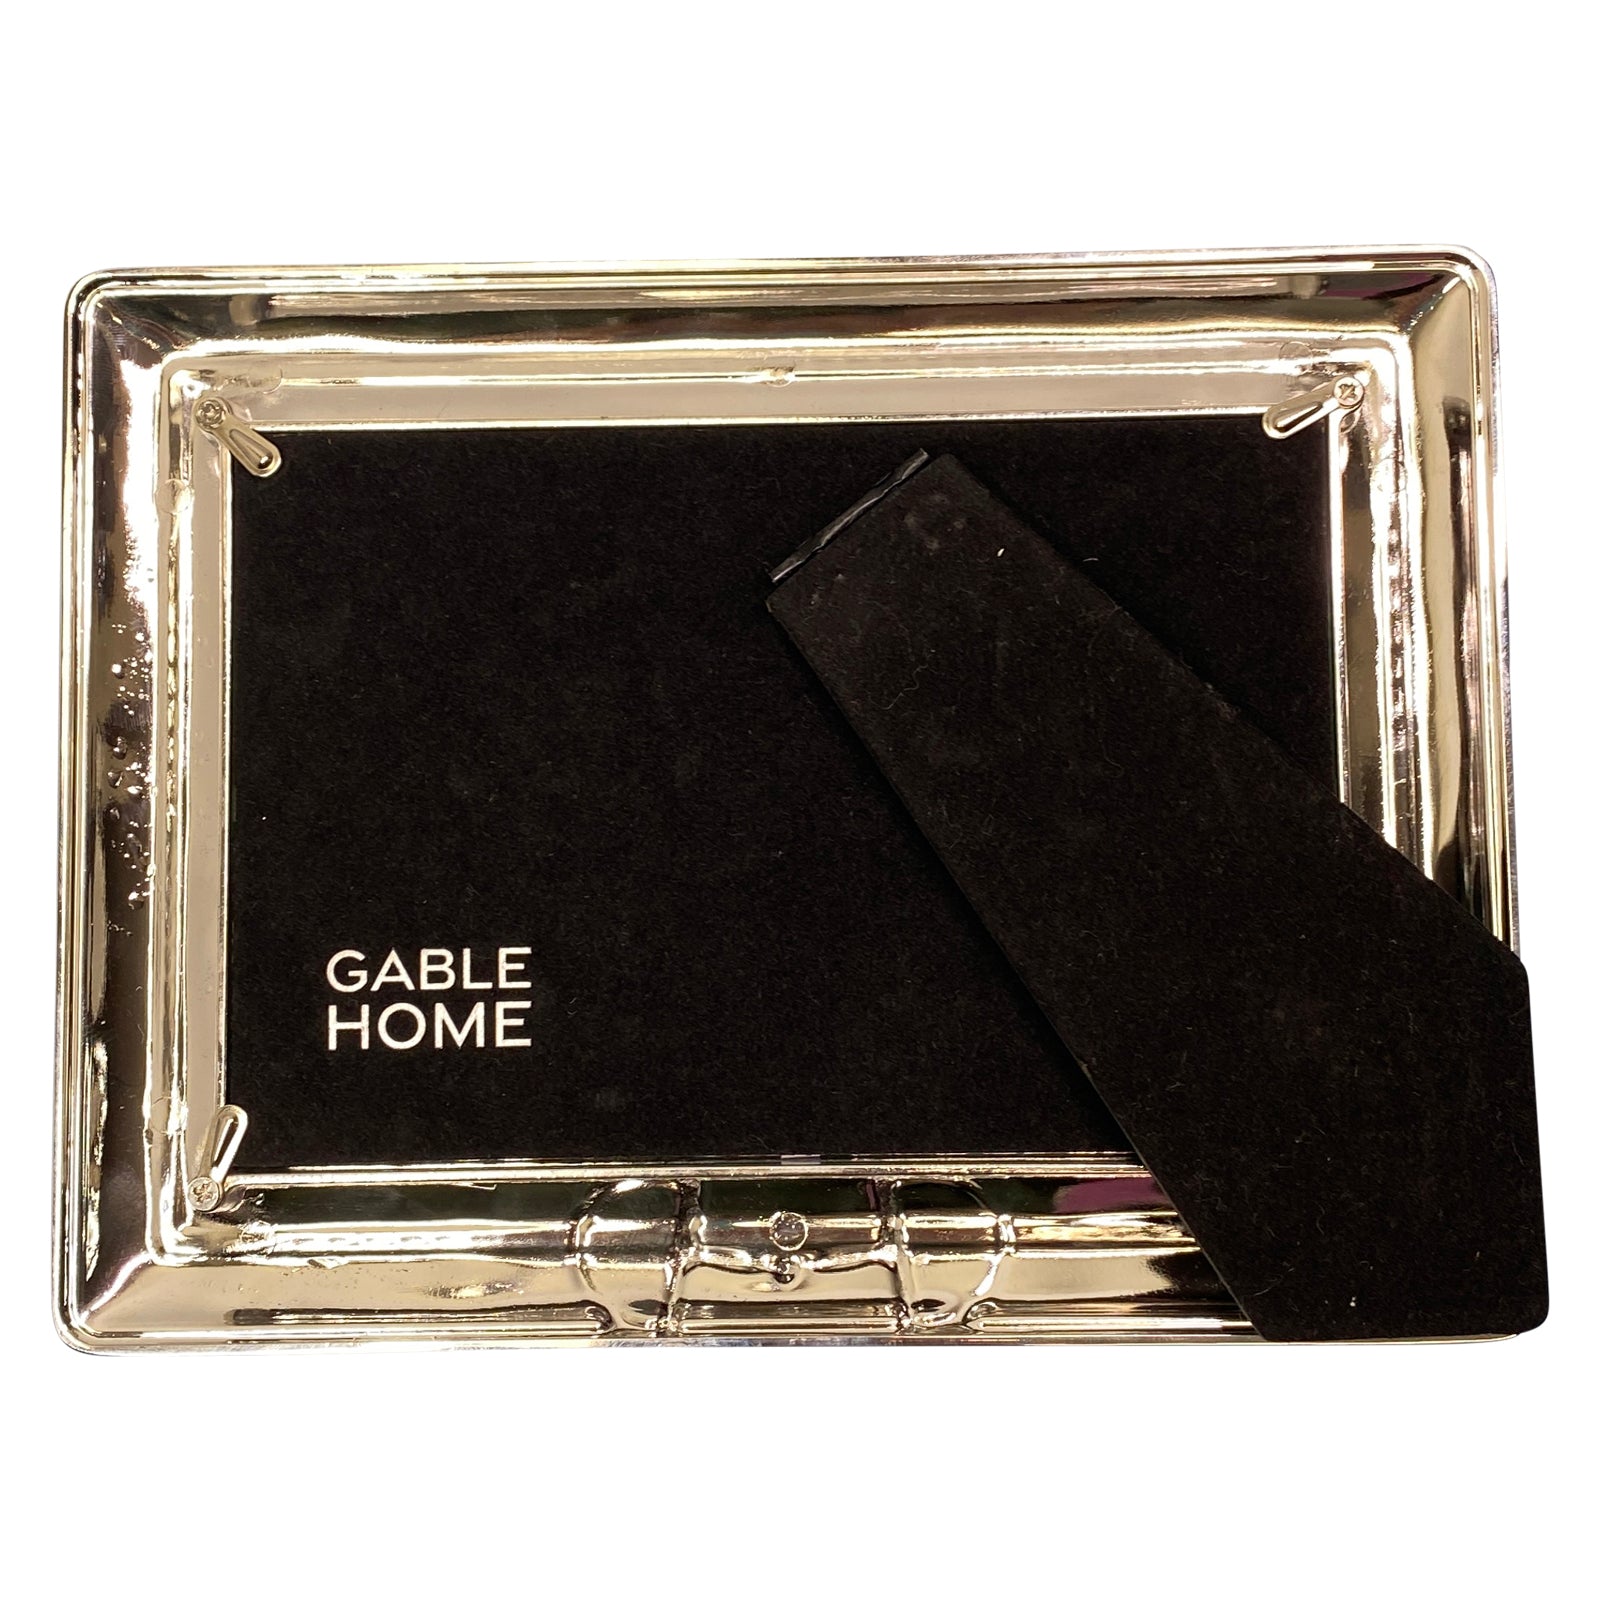 Gable Home Bit Picture Frame in Silver - 8" x 6"